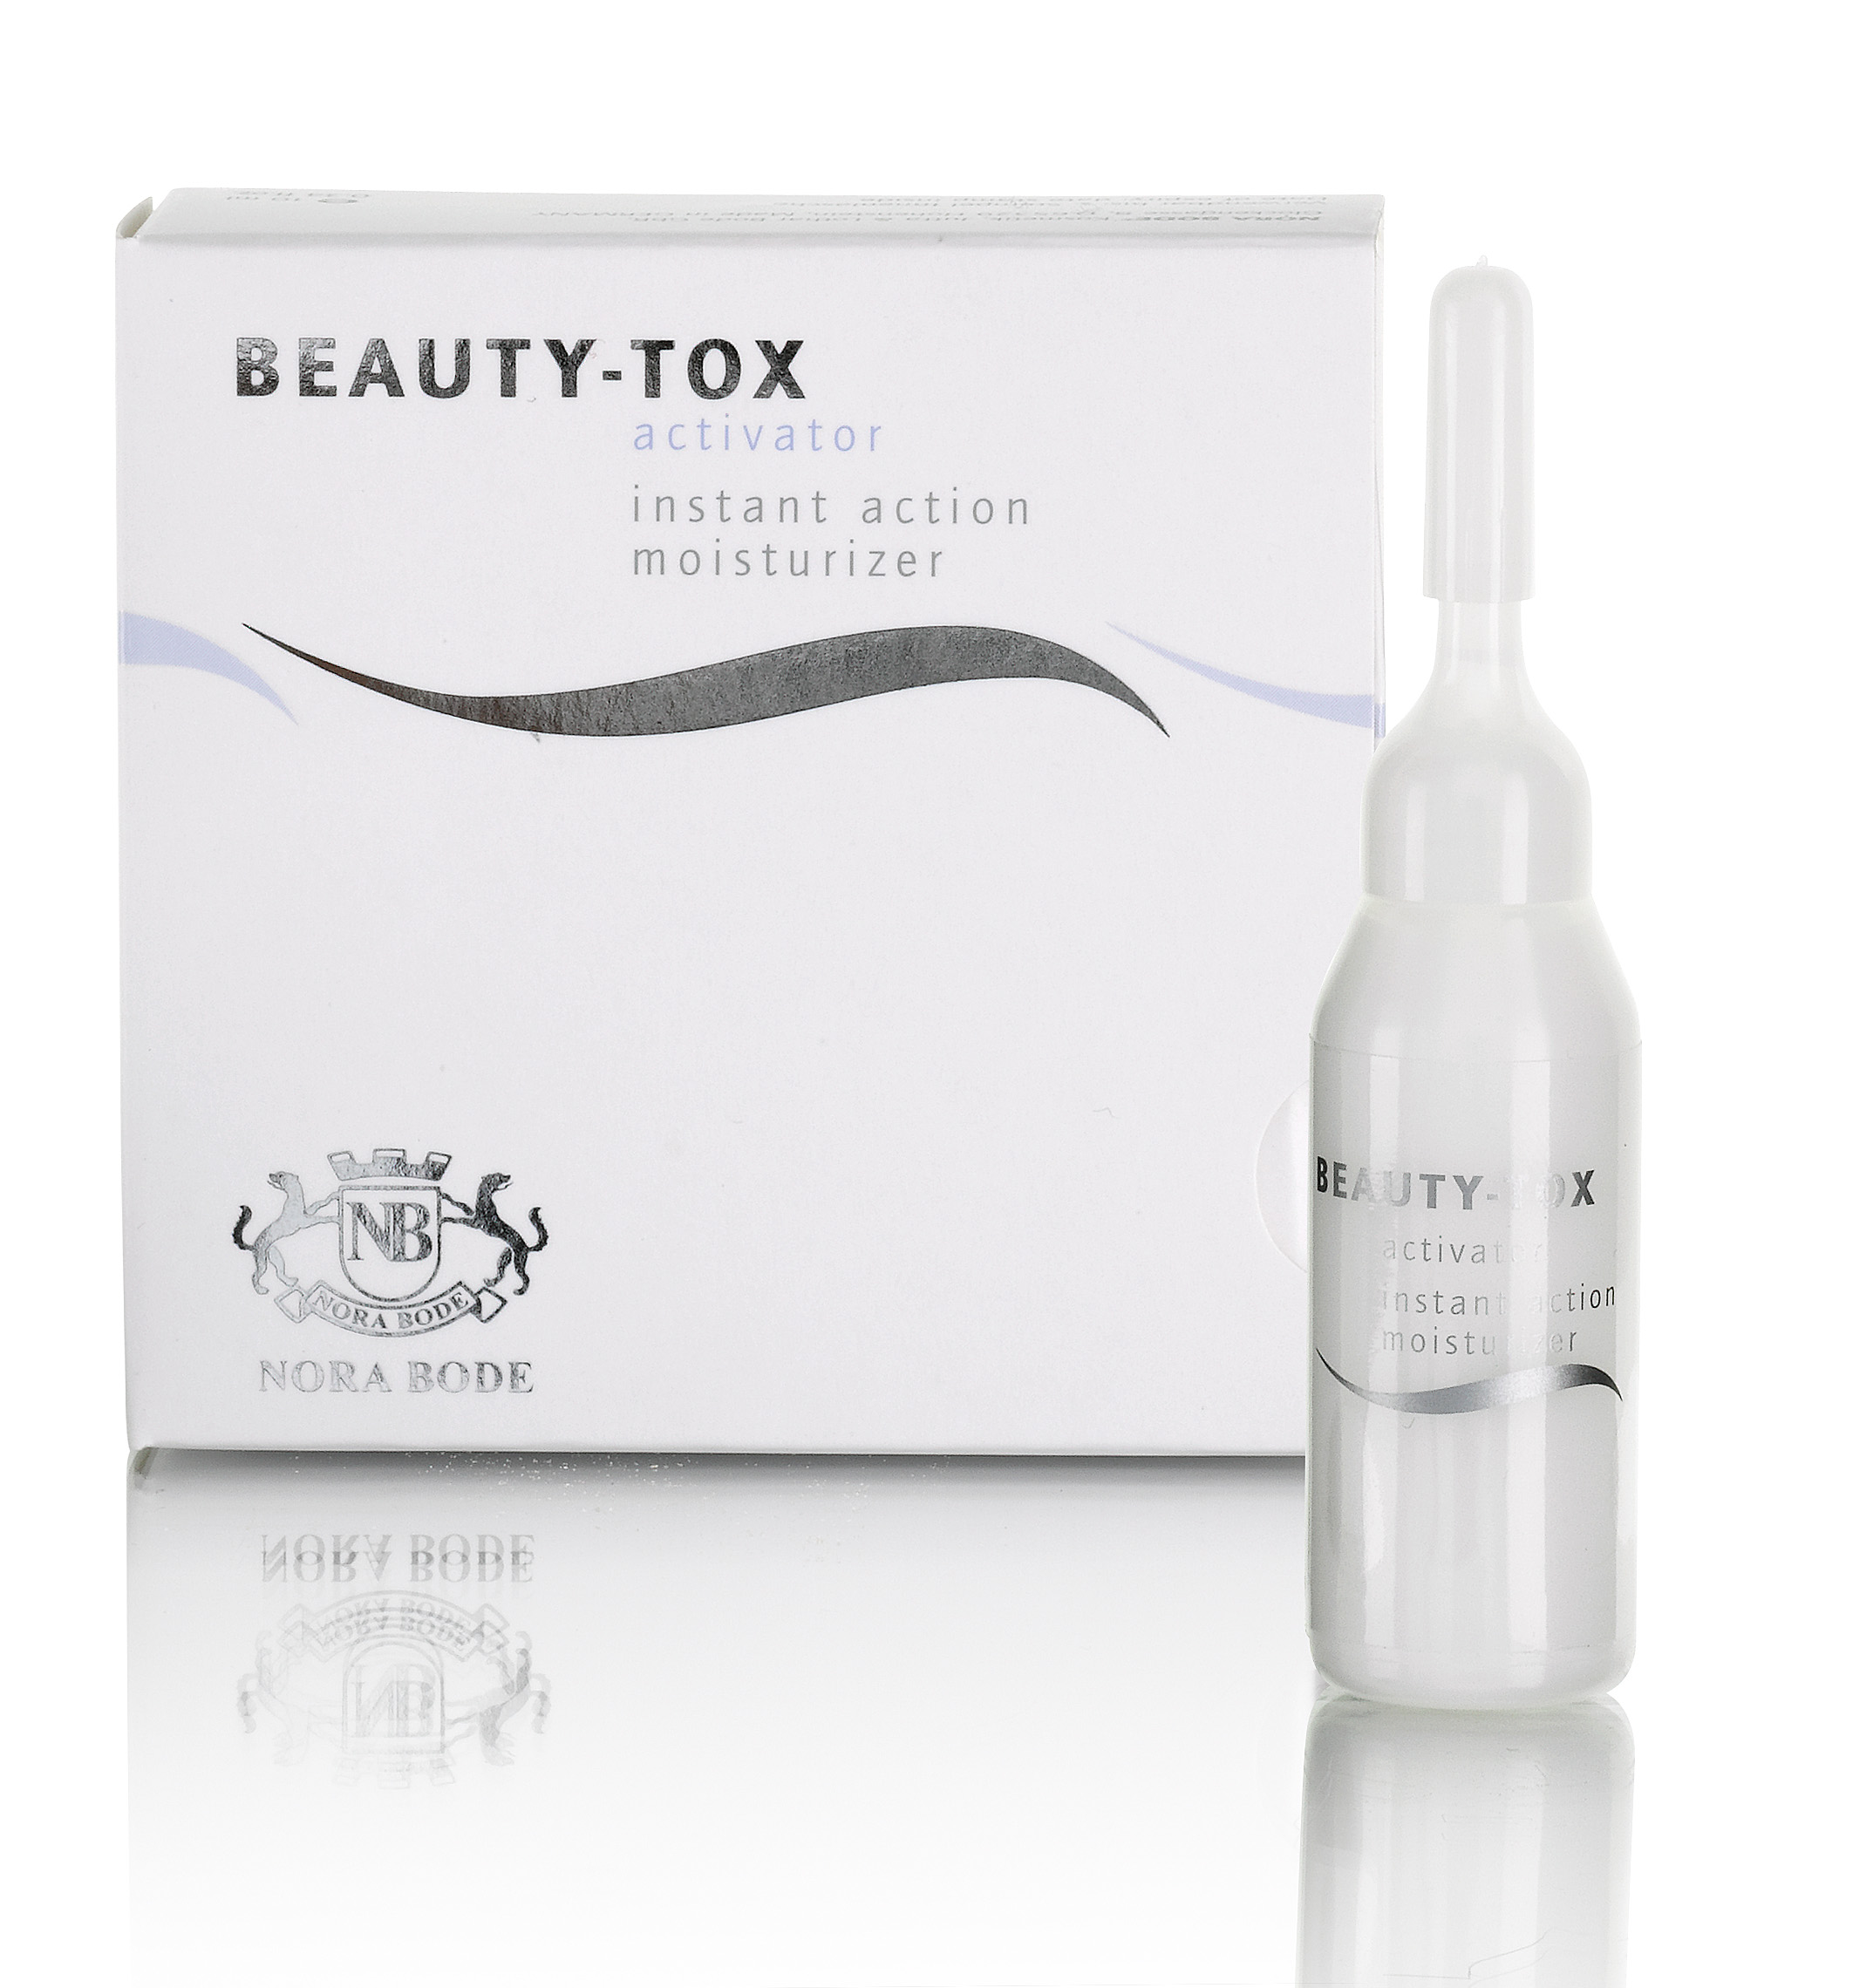 Beauty-Tox_activator instant action moisturizer